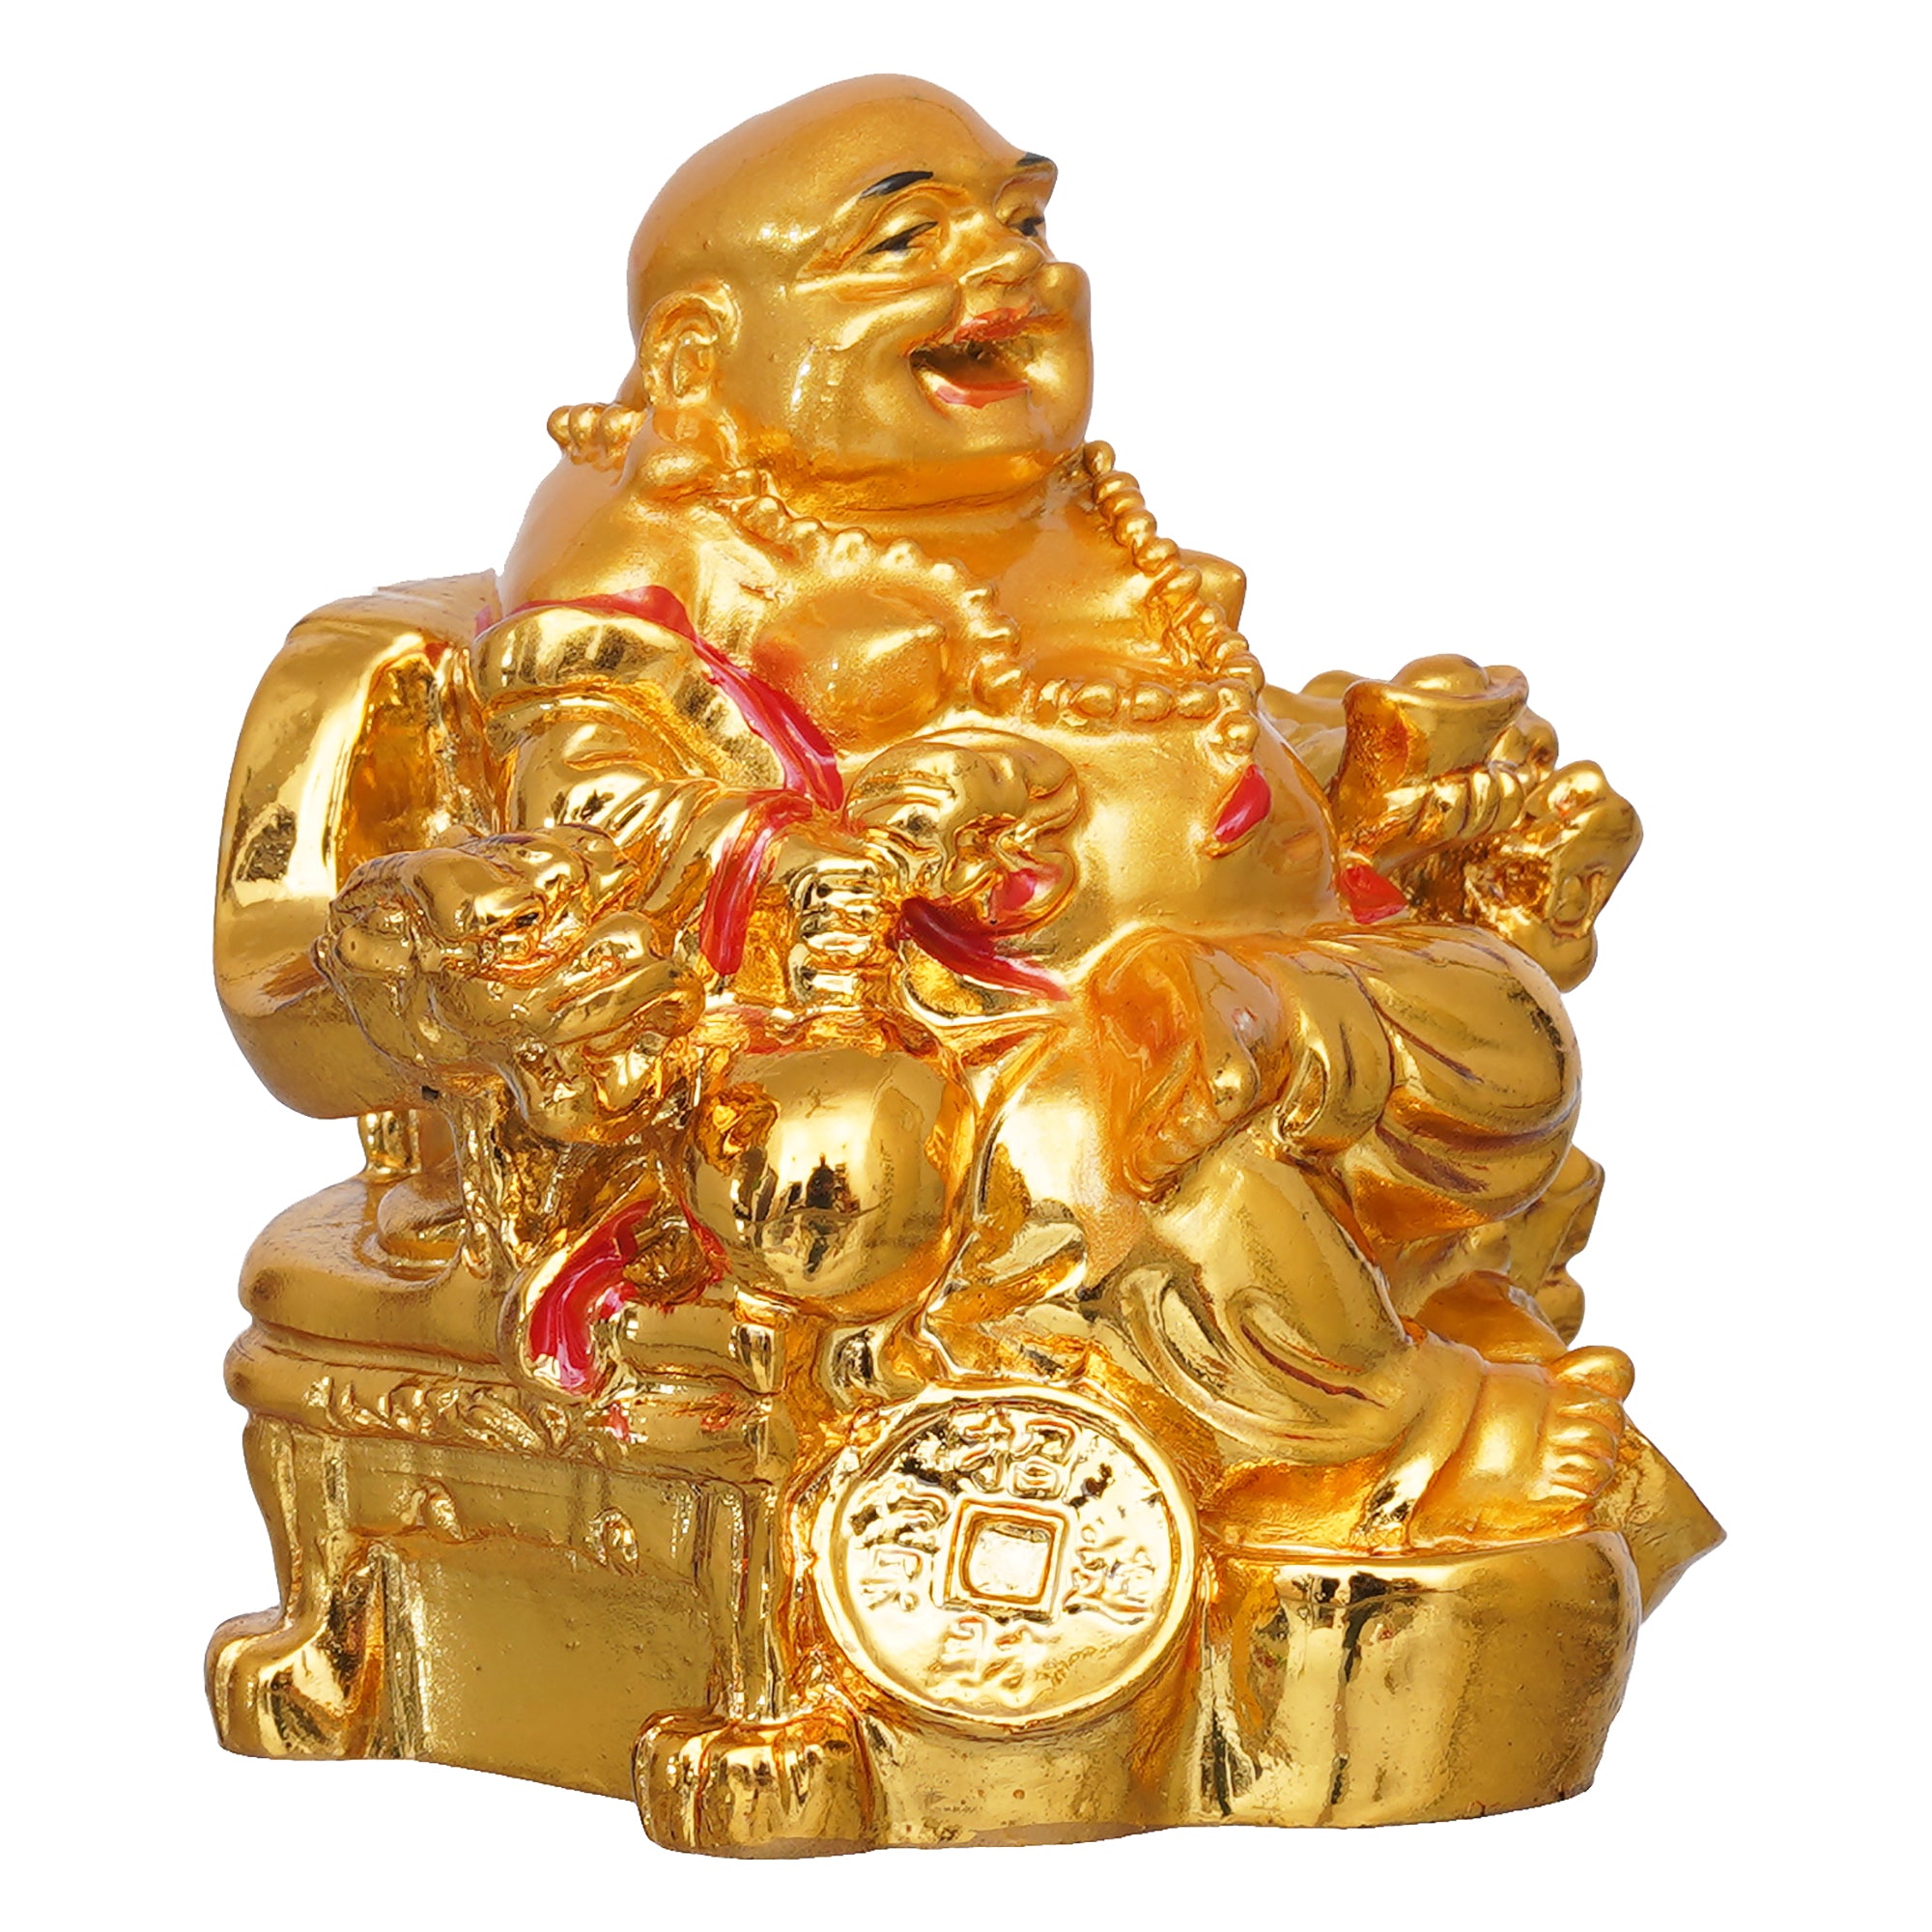 eCraftIndia Golden Polyresin Feng Shui Laughing Buddha Statue Sitting on Chair 7